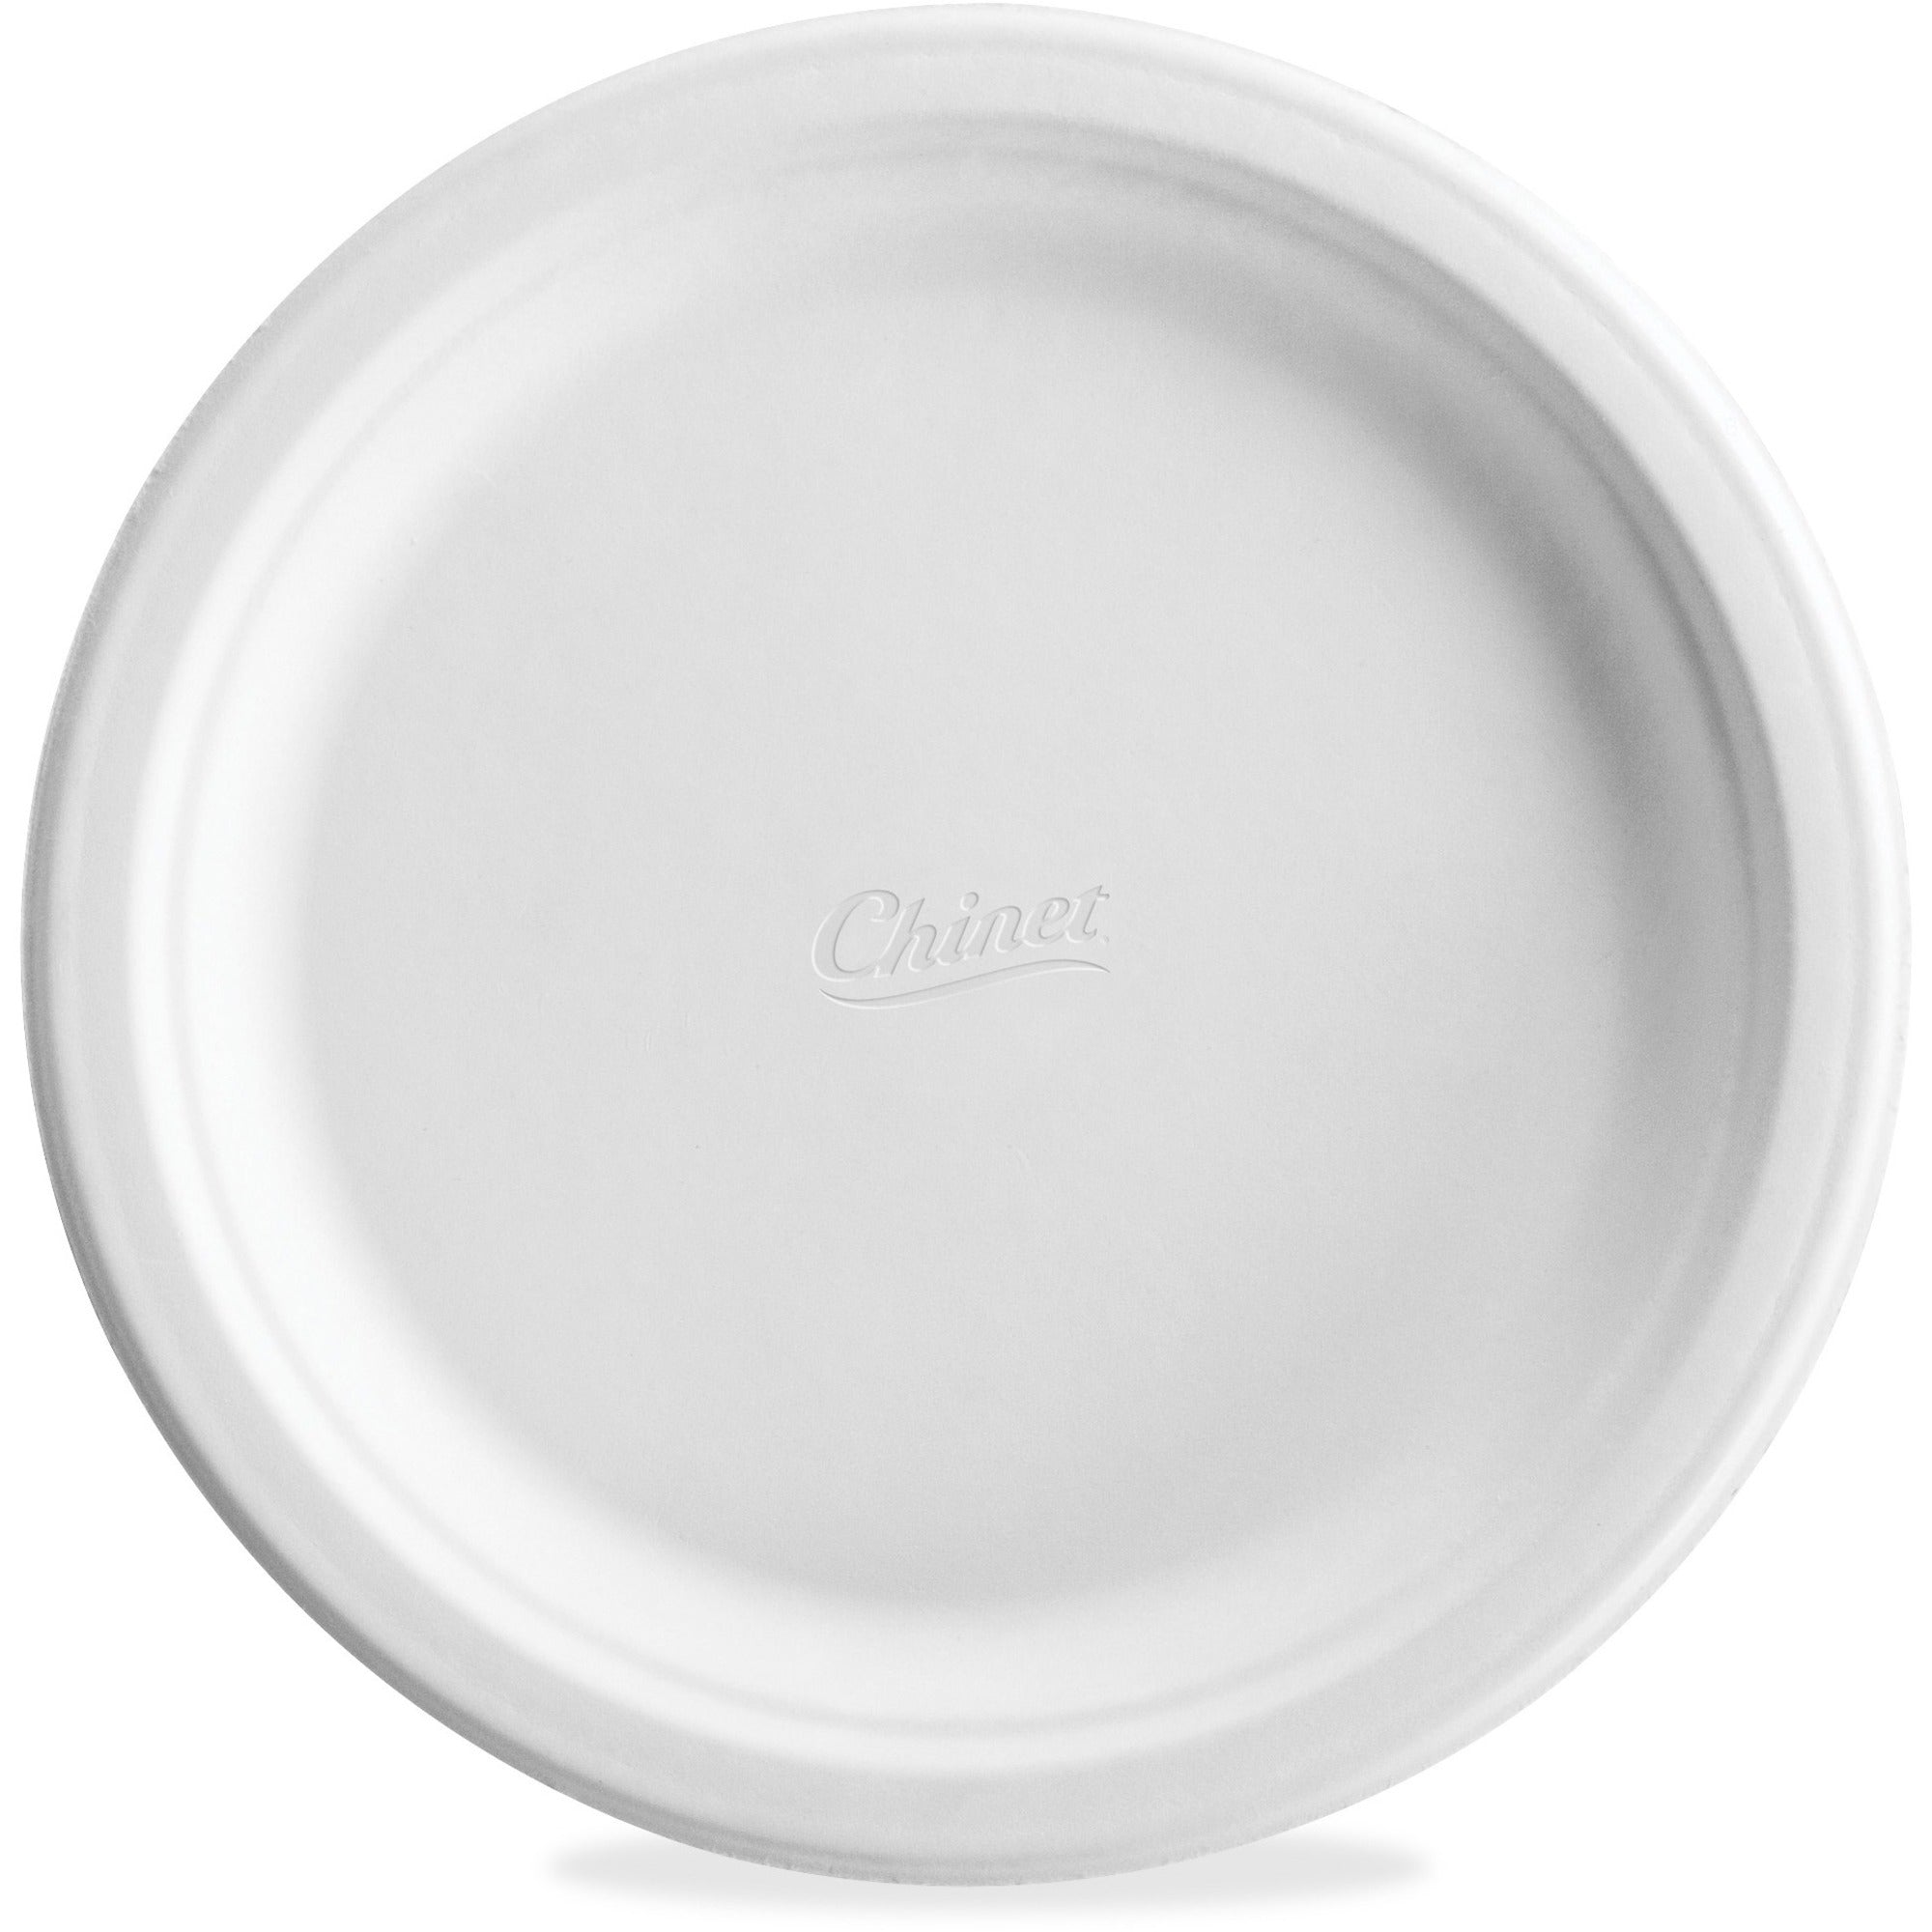 Chinet Classic 8-3/4" Round Molded Plates - 125 / Pack - Food - Disposable - Microwave Safe - White - Molded Fiber, Paper Body - 4 / Carton